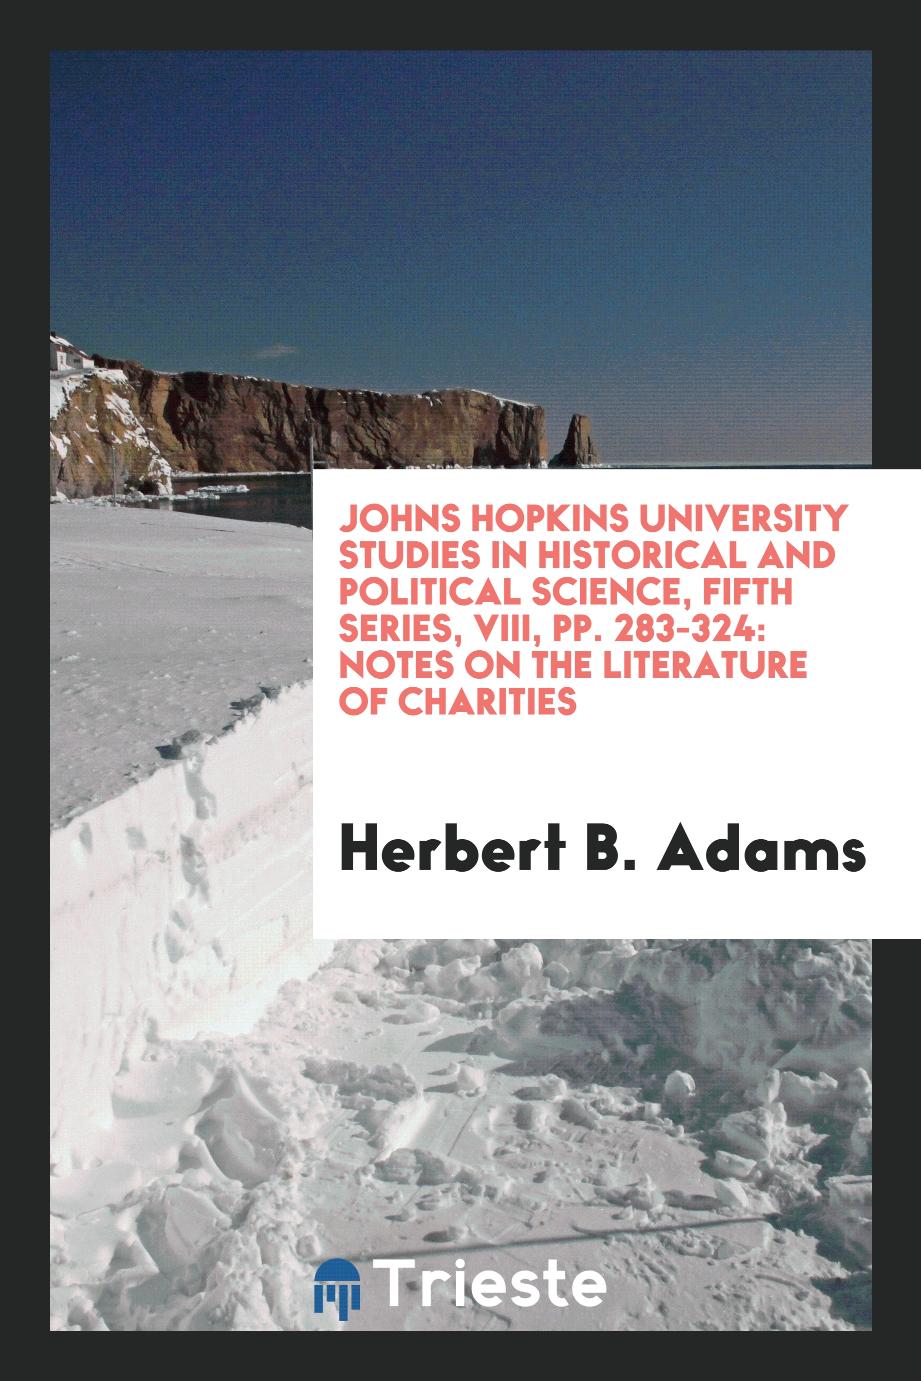 Johns Hopkins university studies in historical and political science, Fifth series, VIII, pp. 283-324: Notes on the Literature of Charities